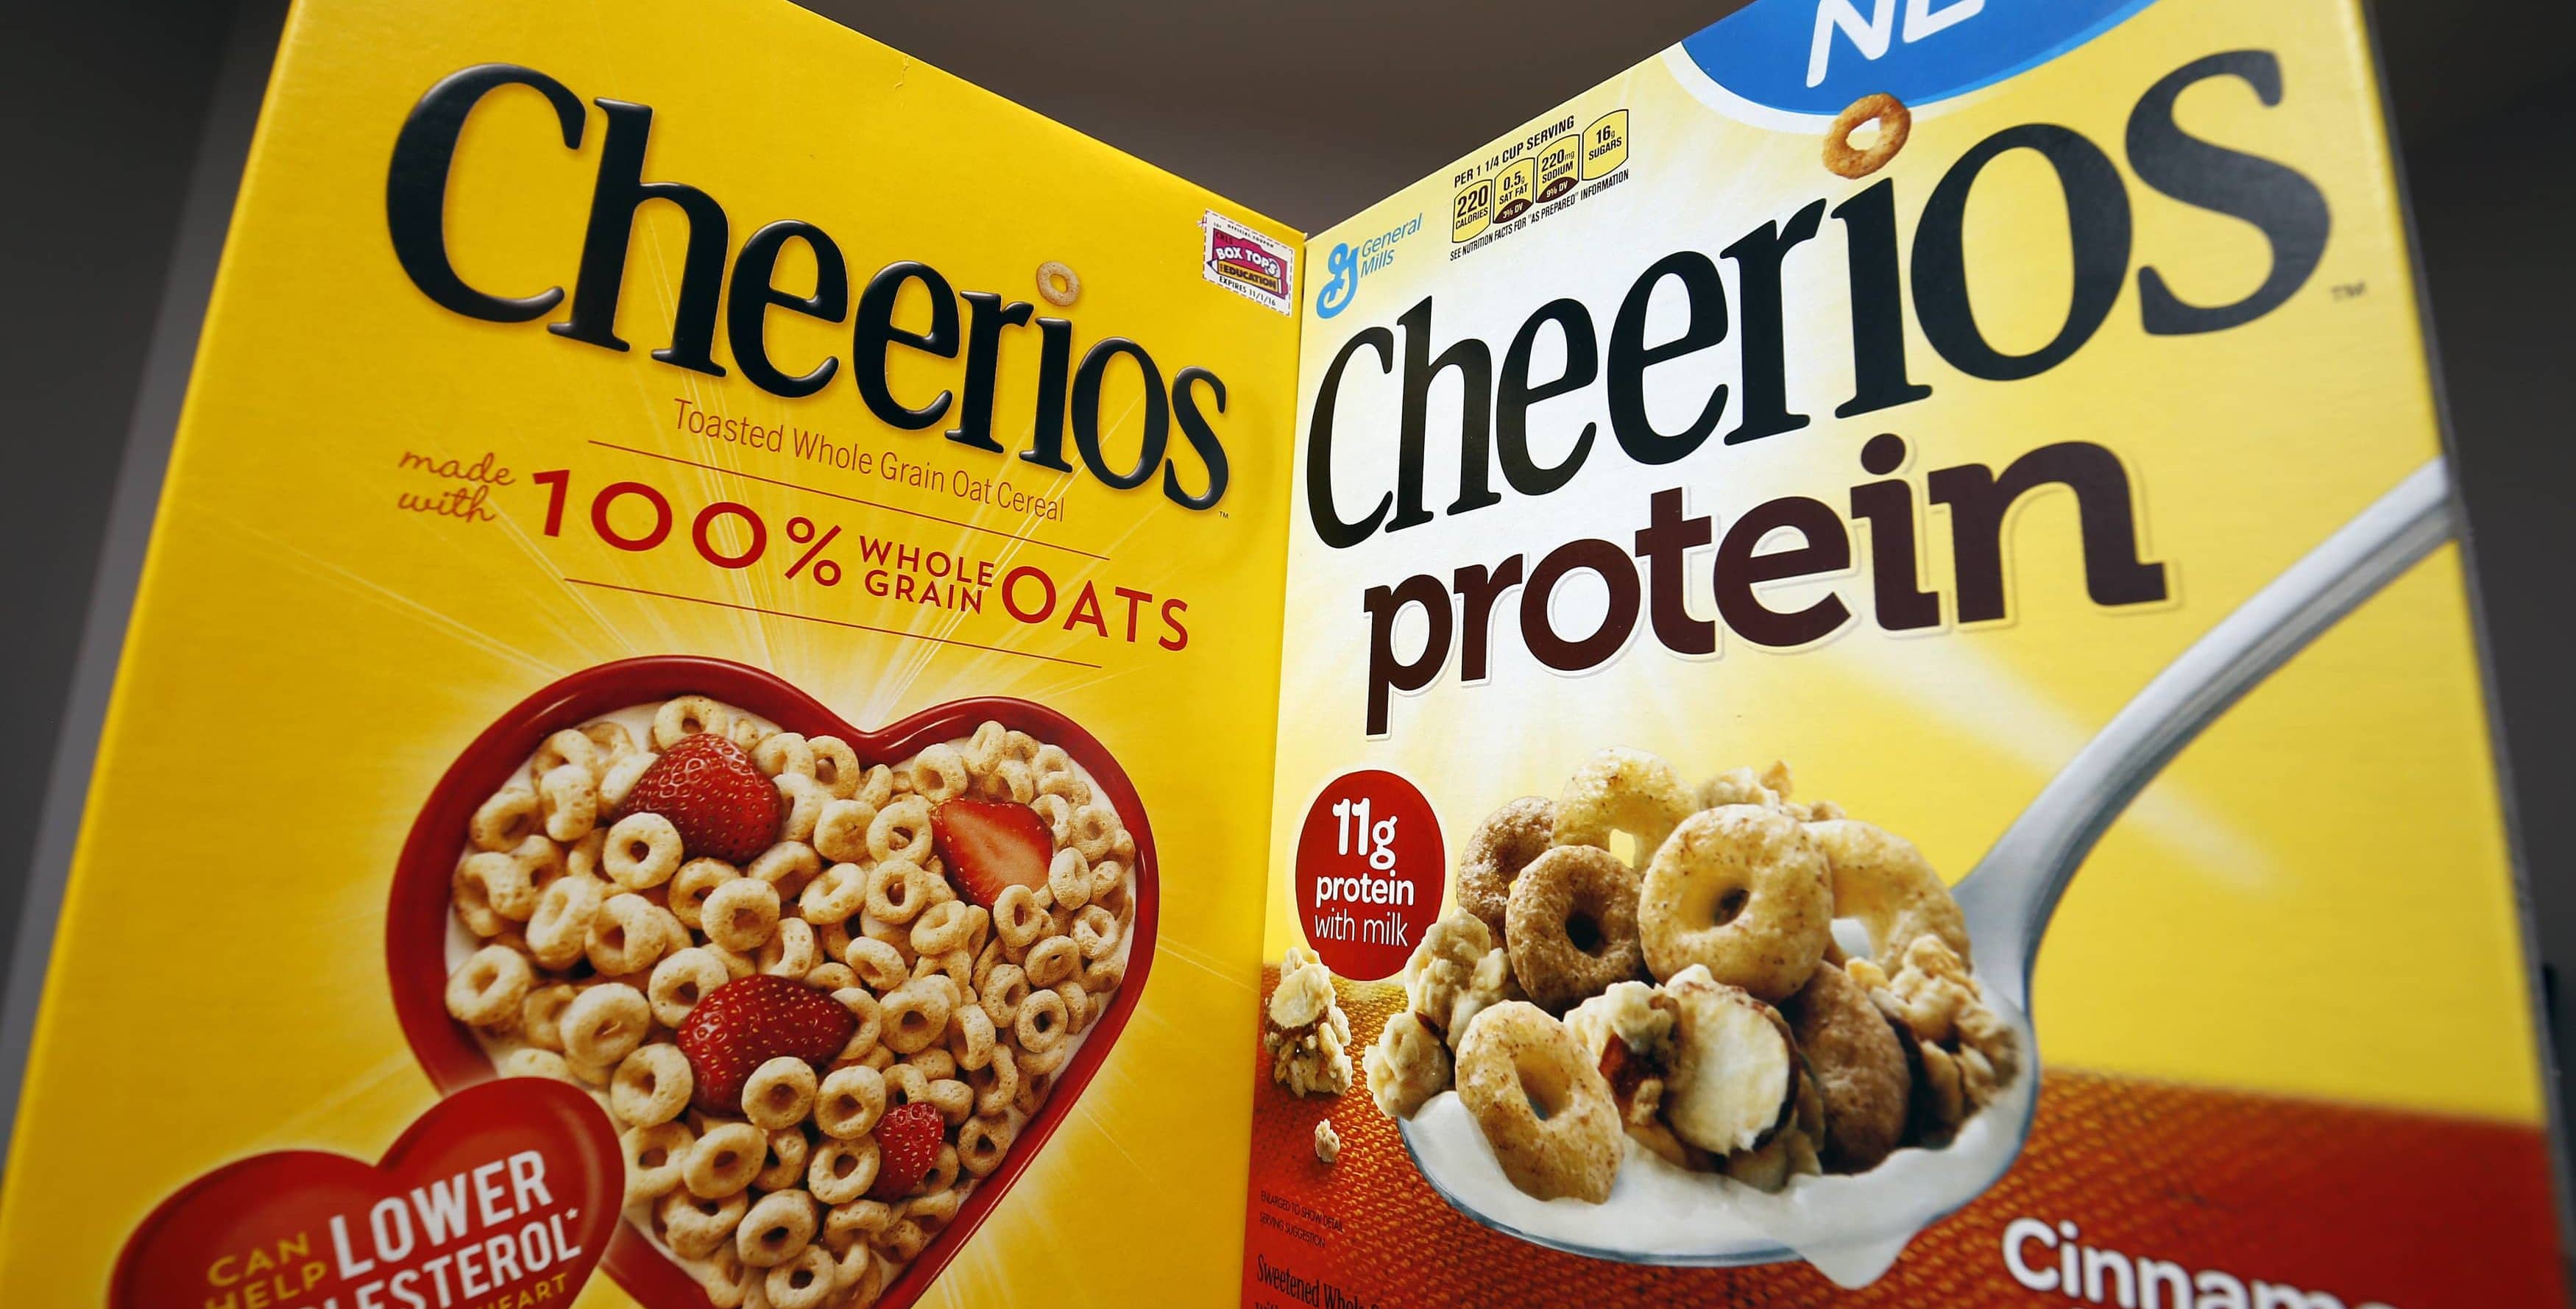 photo-illustration-of-two-types-of-cheerios-cereal-in-wilmette